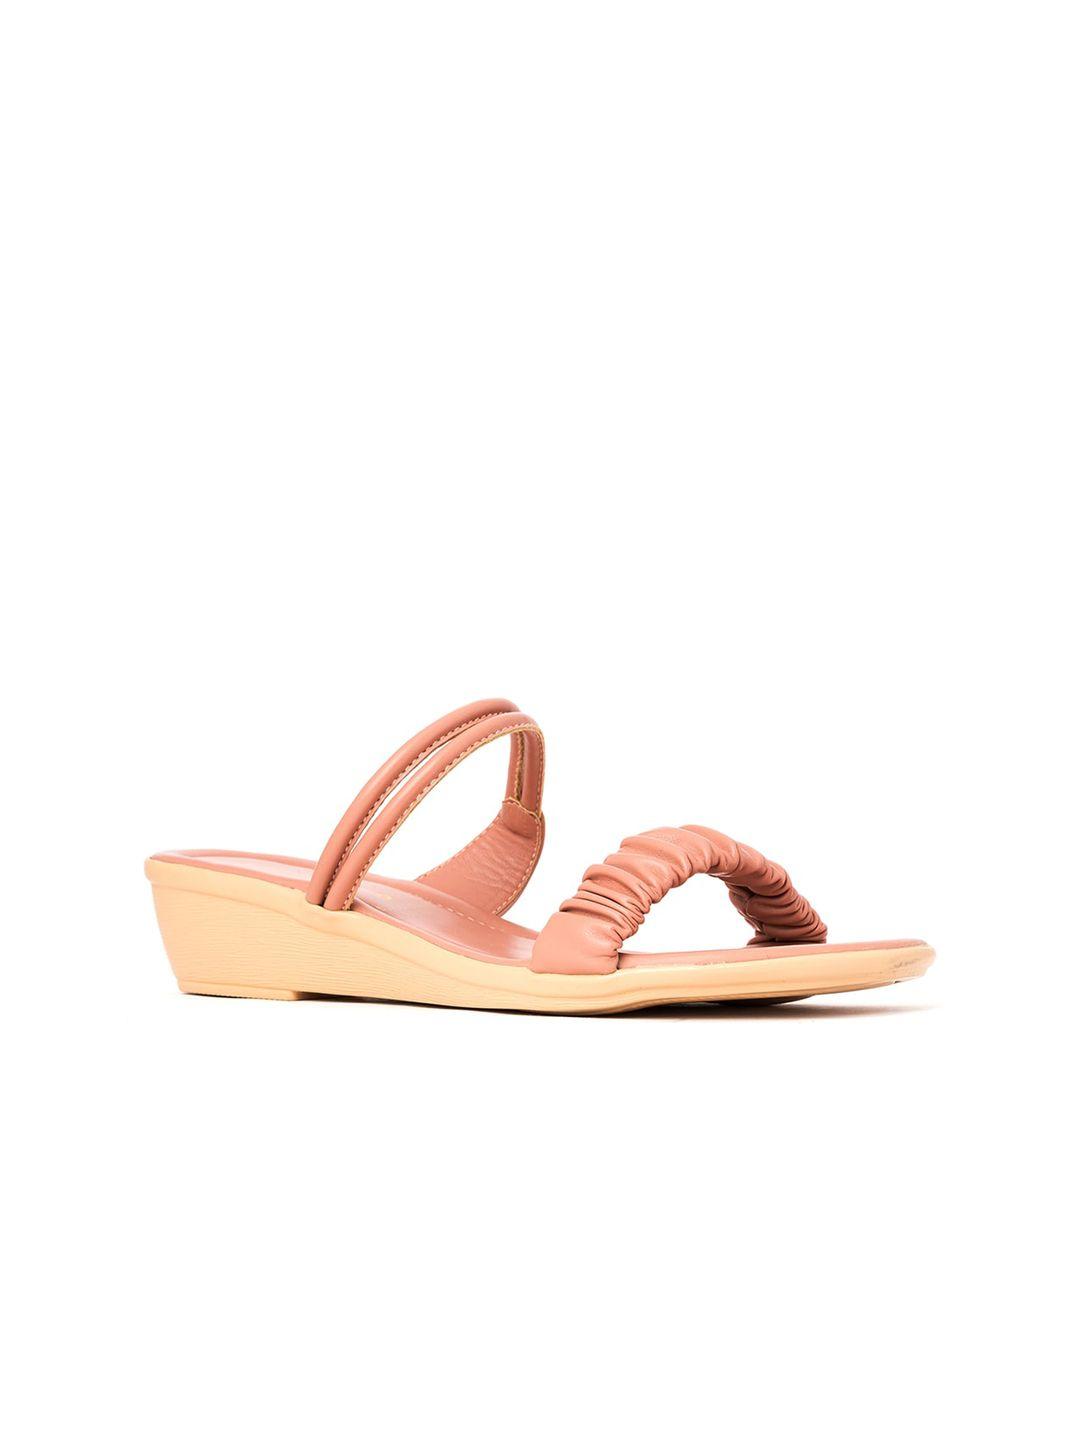 khadims-pink-textured-wedge-sandals-with-buckles